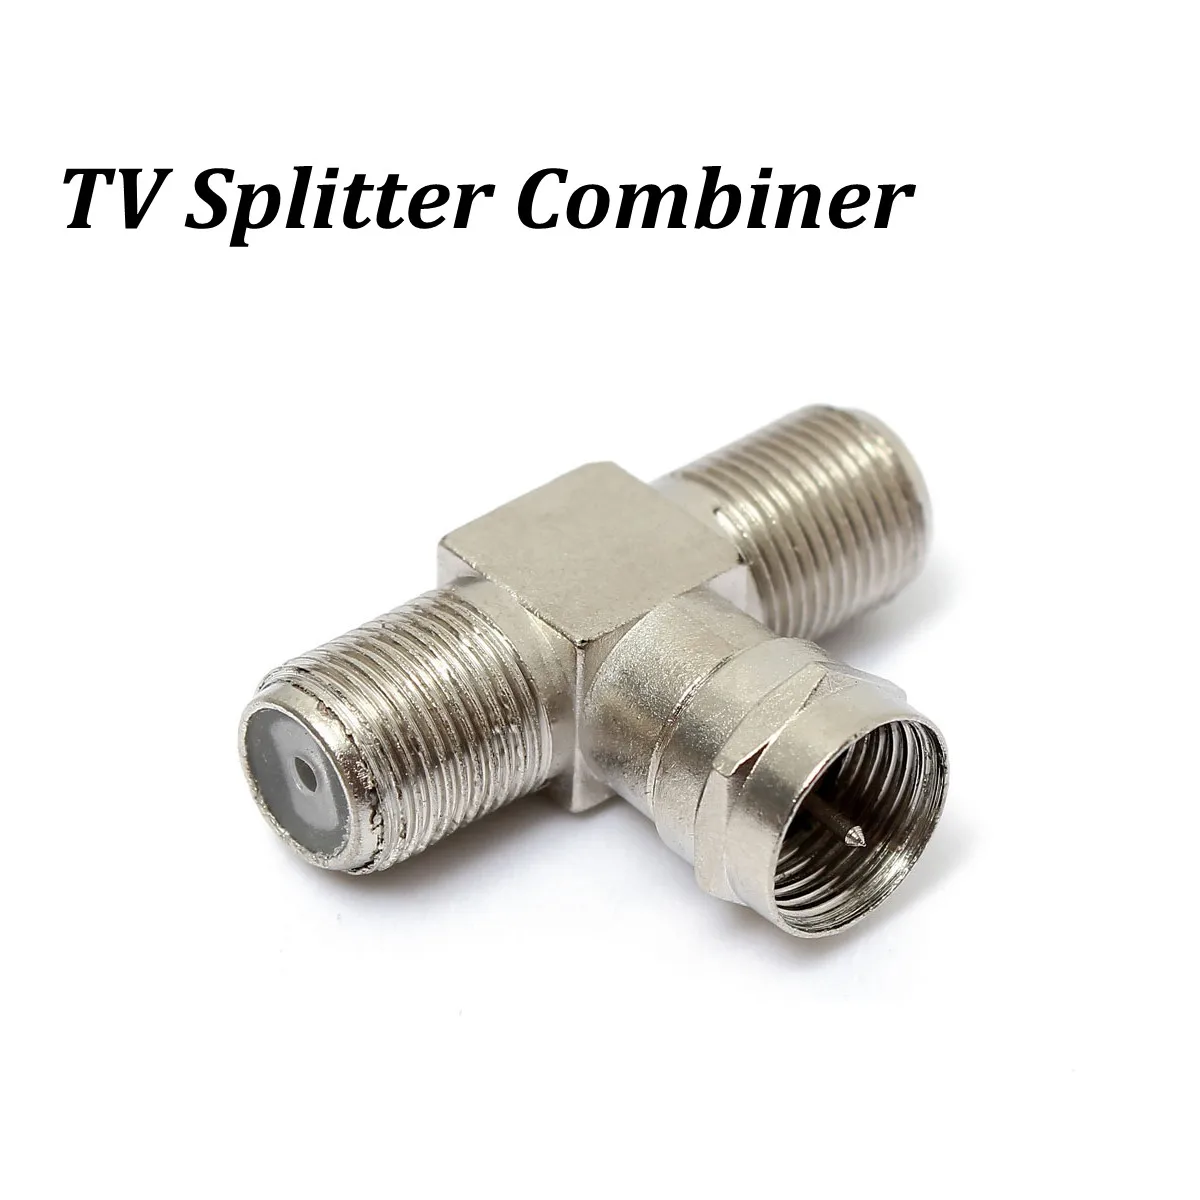 Male to Female 2 Way F-Type Splitter Combiner TV Virgin Cable Sky Satellit EP